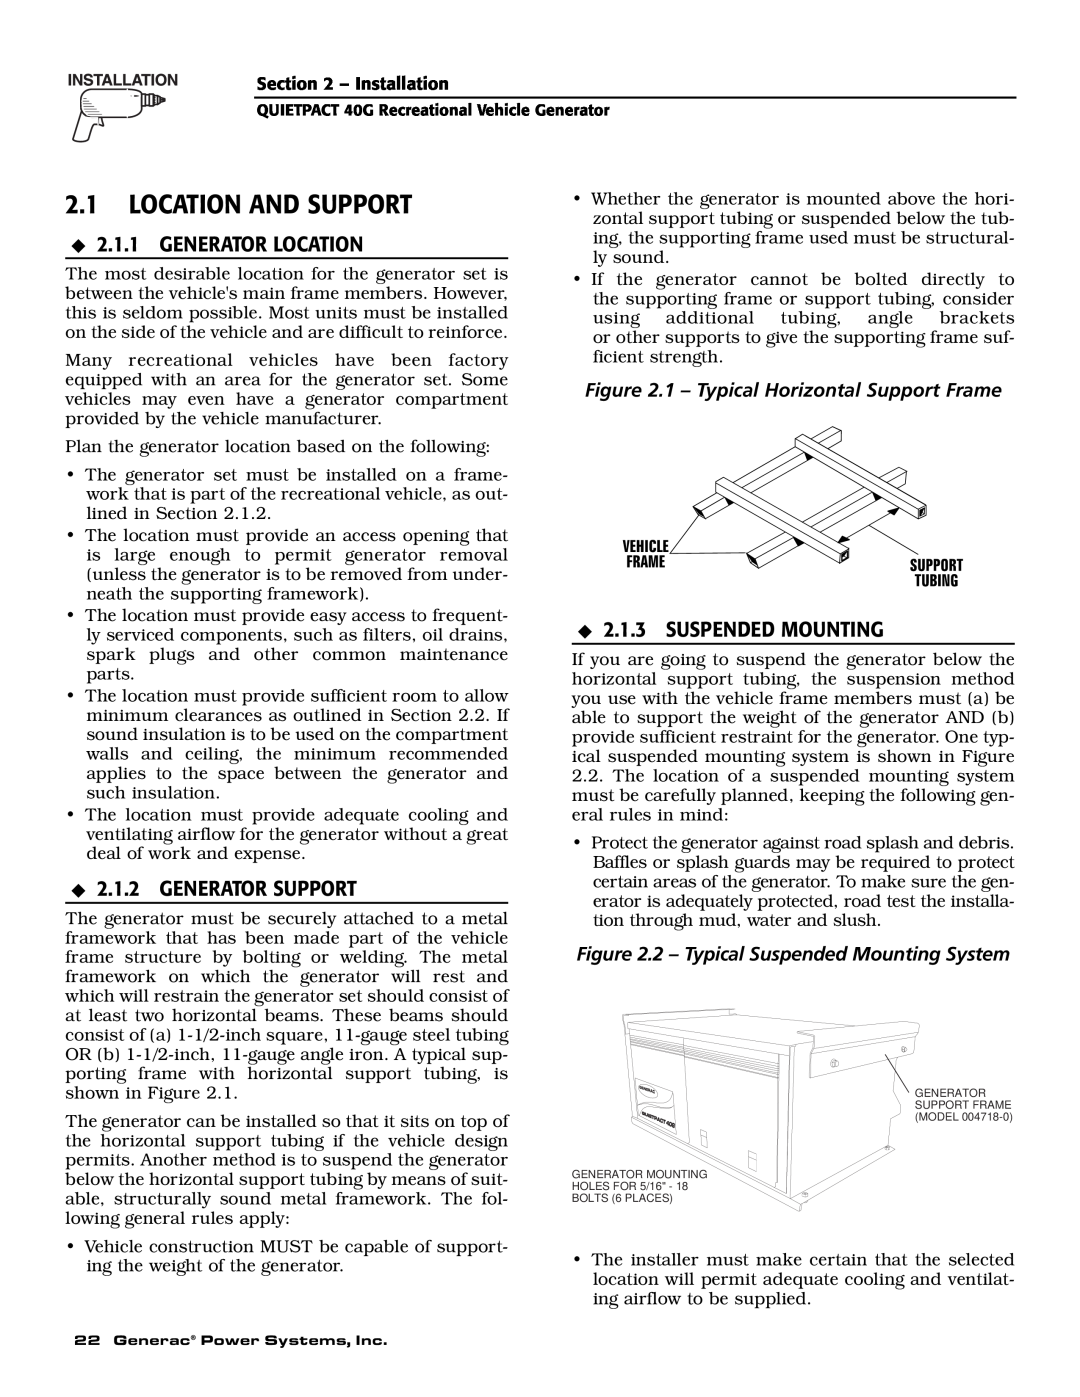 Generac 004700-0 owner manual Location And Support, Generator Location, Generator Support, Suspended Mounting 